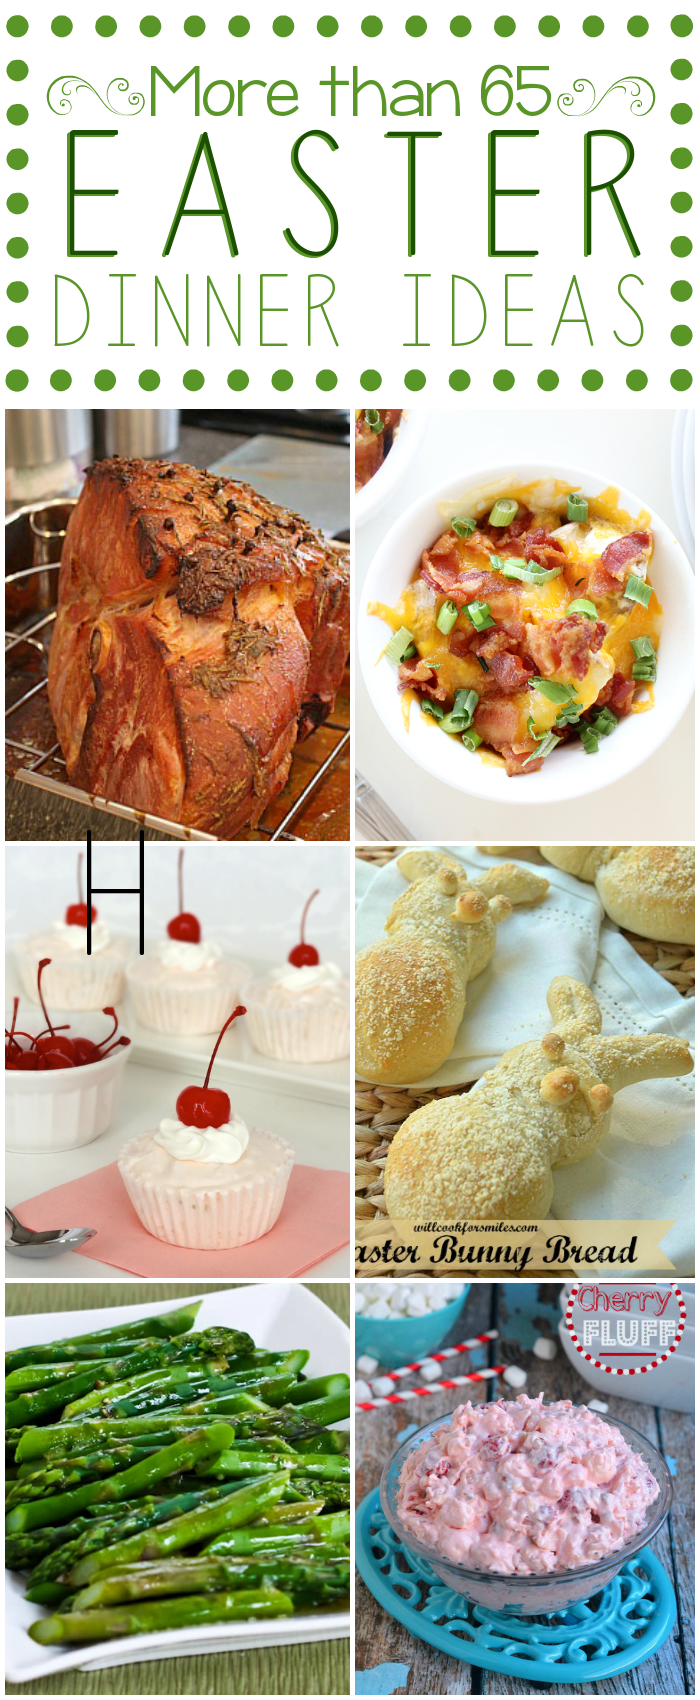 Easter Dinner Ideas {Round-Up}